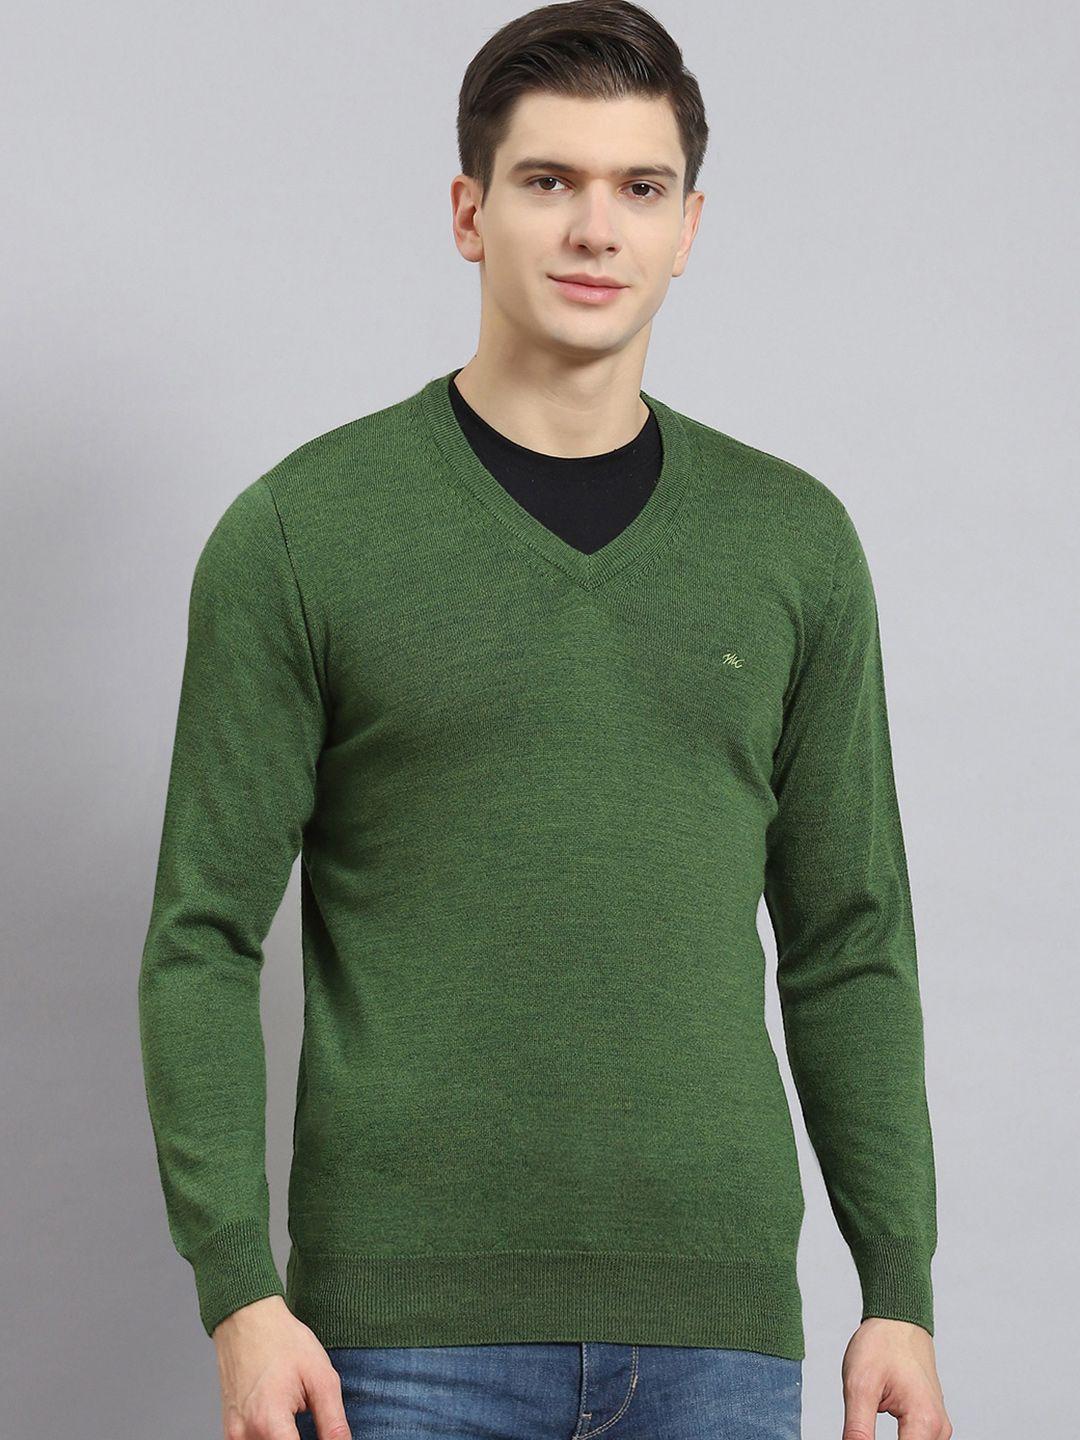 monte carlo v-neck long sleeves woollen pullover